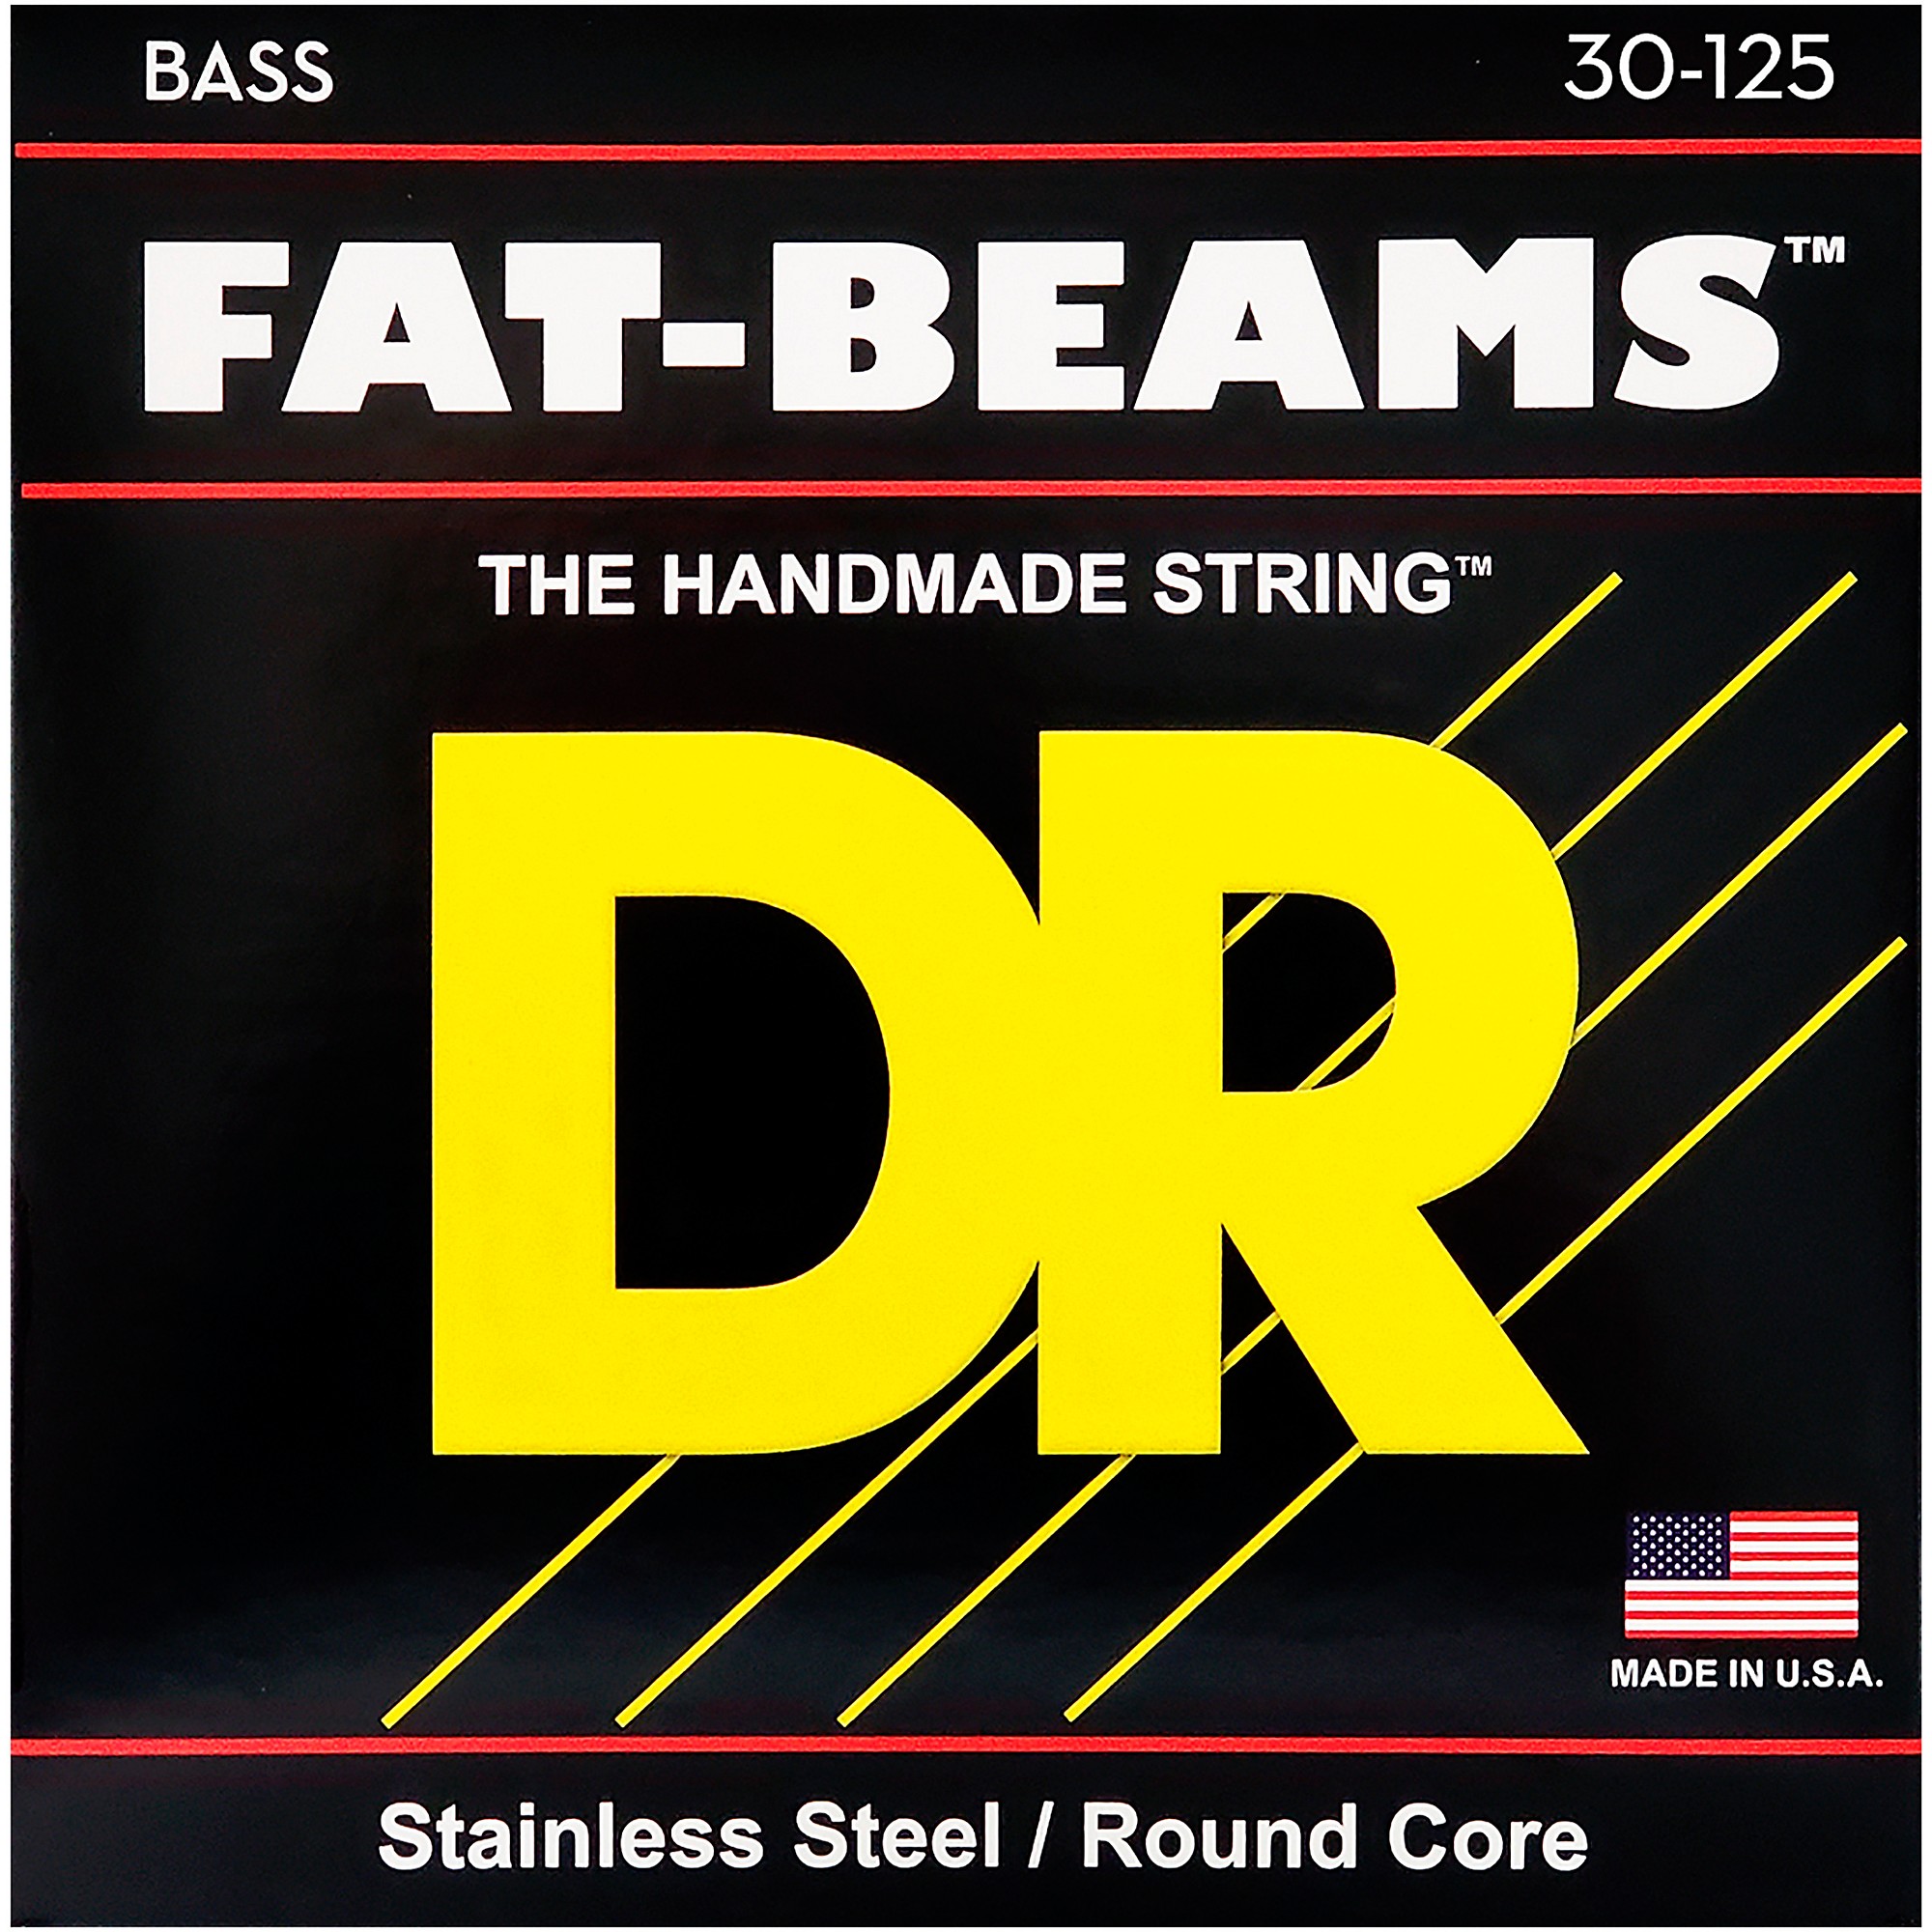 LaBella Stainless Steel Electric Bass Strings Round Wound 45-65-85-105 -  Bass Strings Only